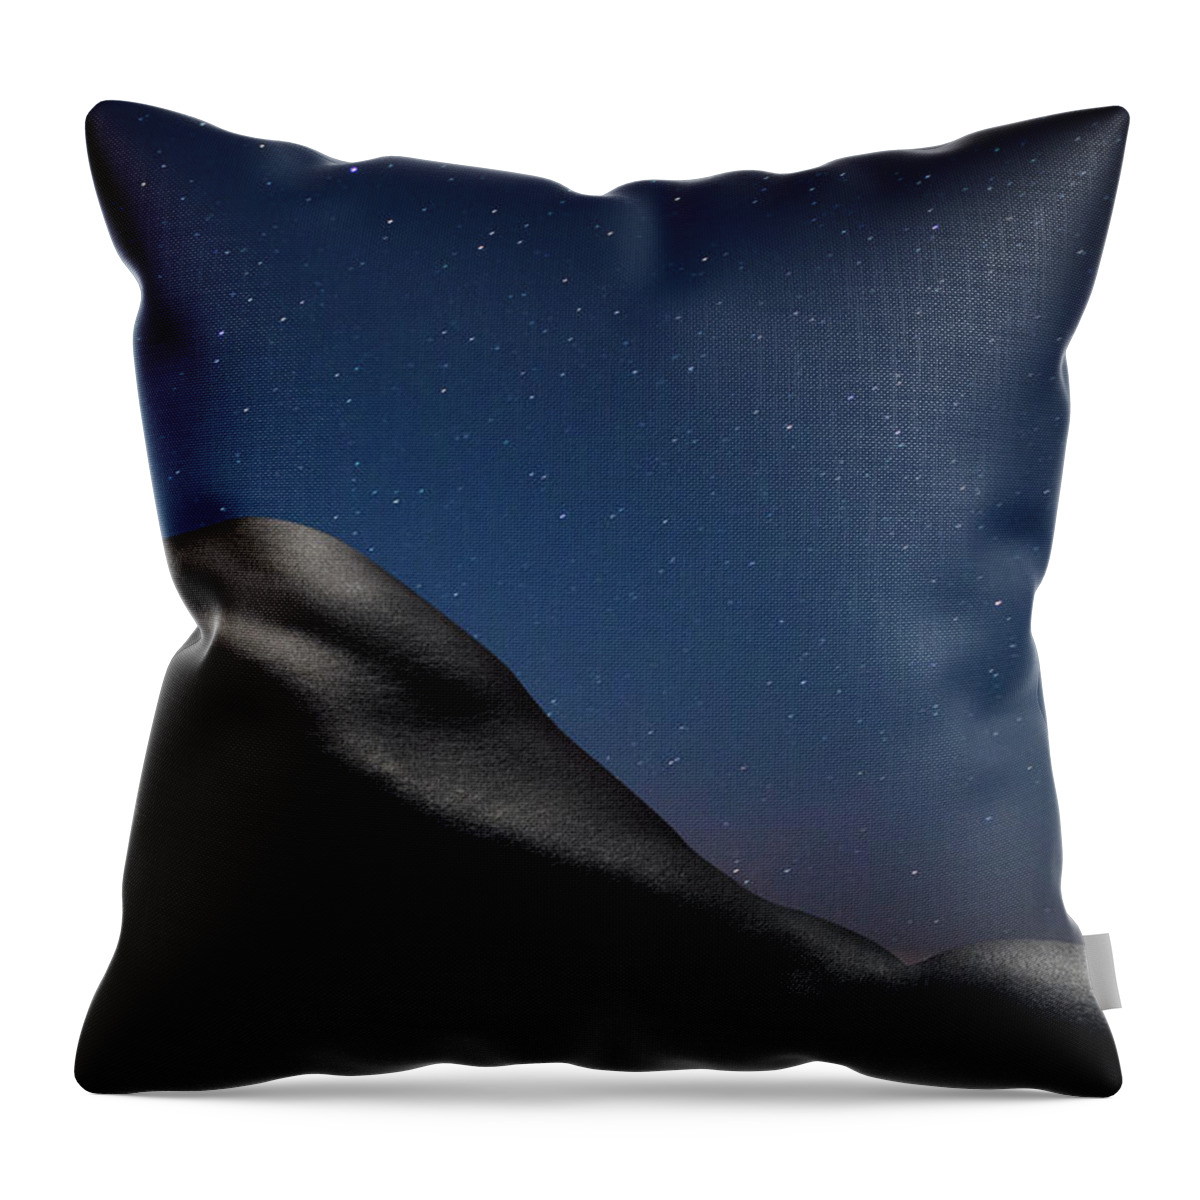 Skin Throw Pillow featuring the photograph Dark Skinned Males Back Against Starry by Jonathan Knowles